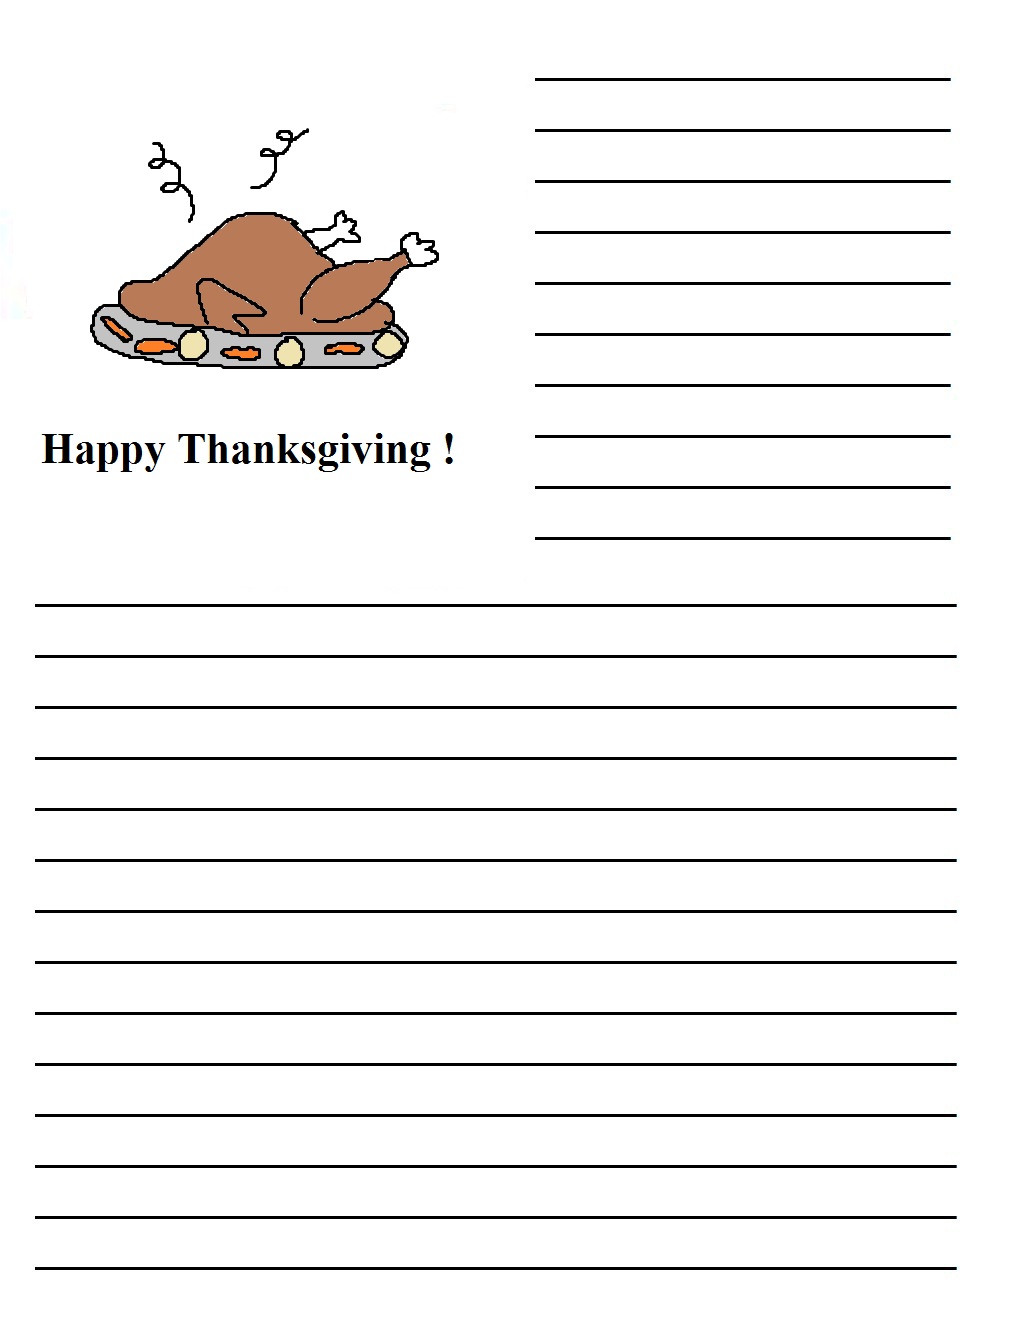 78 Thanksgiving Writing Prompts